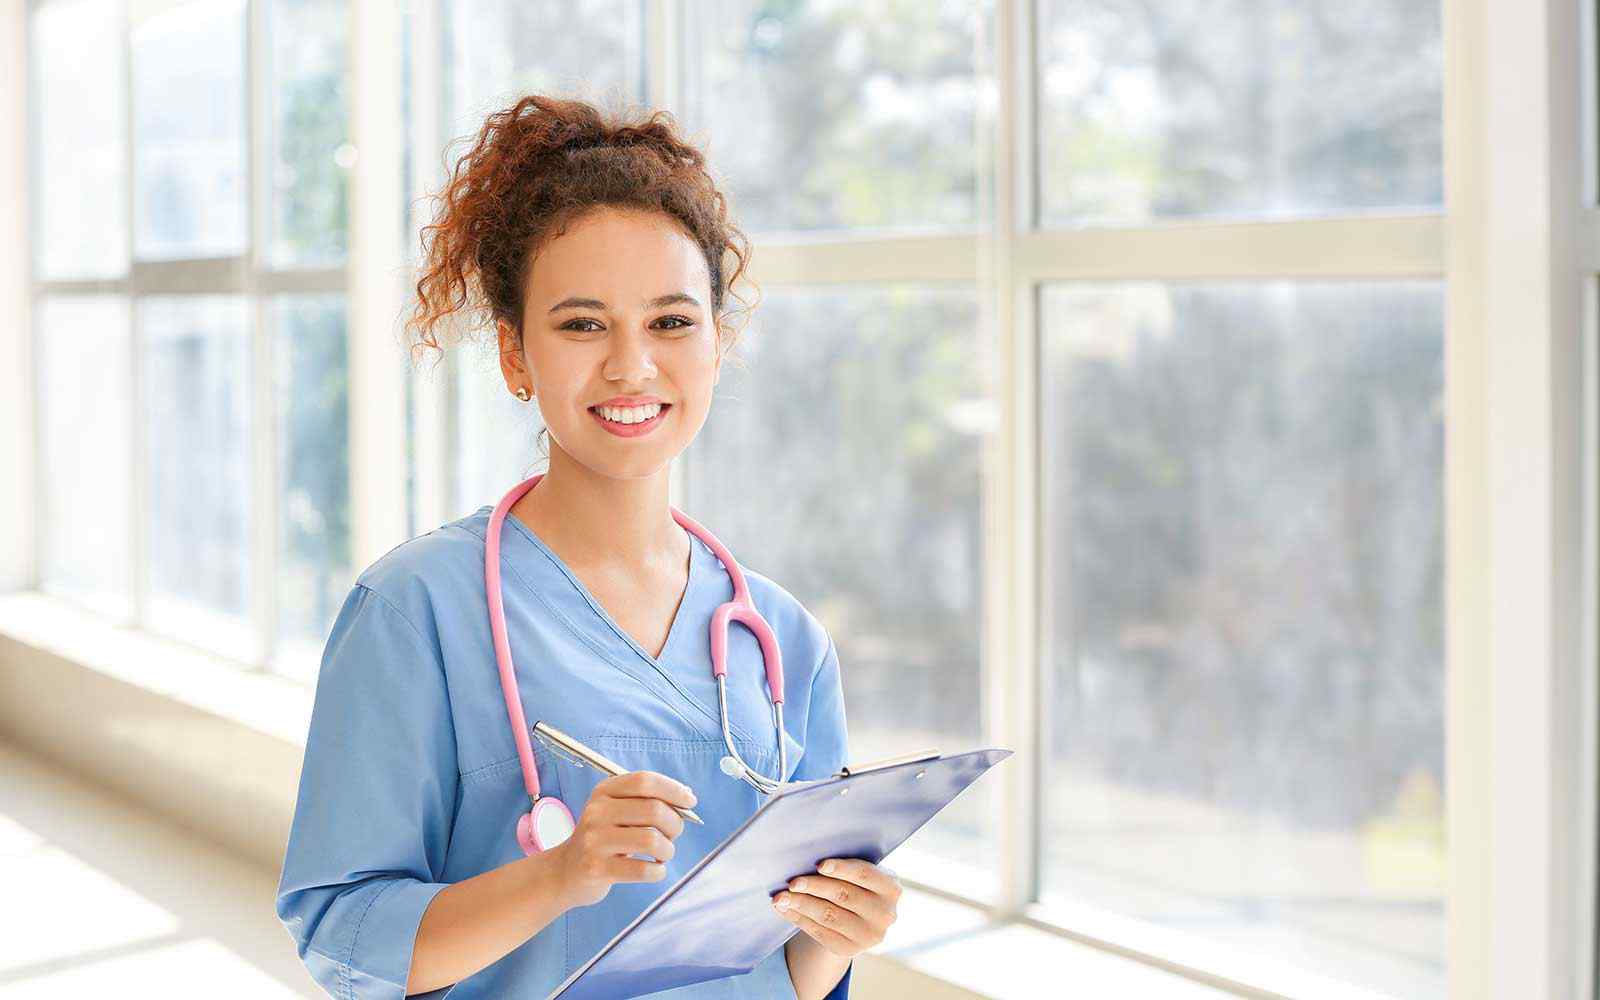 A student in scrubs smiles at the camera. She is holding a clipboard and stethoscope. 